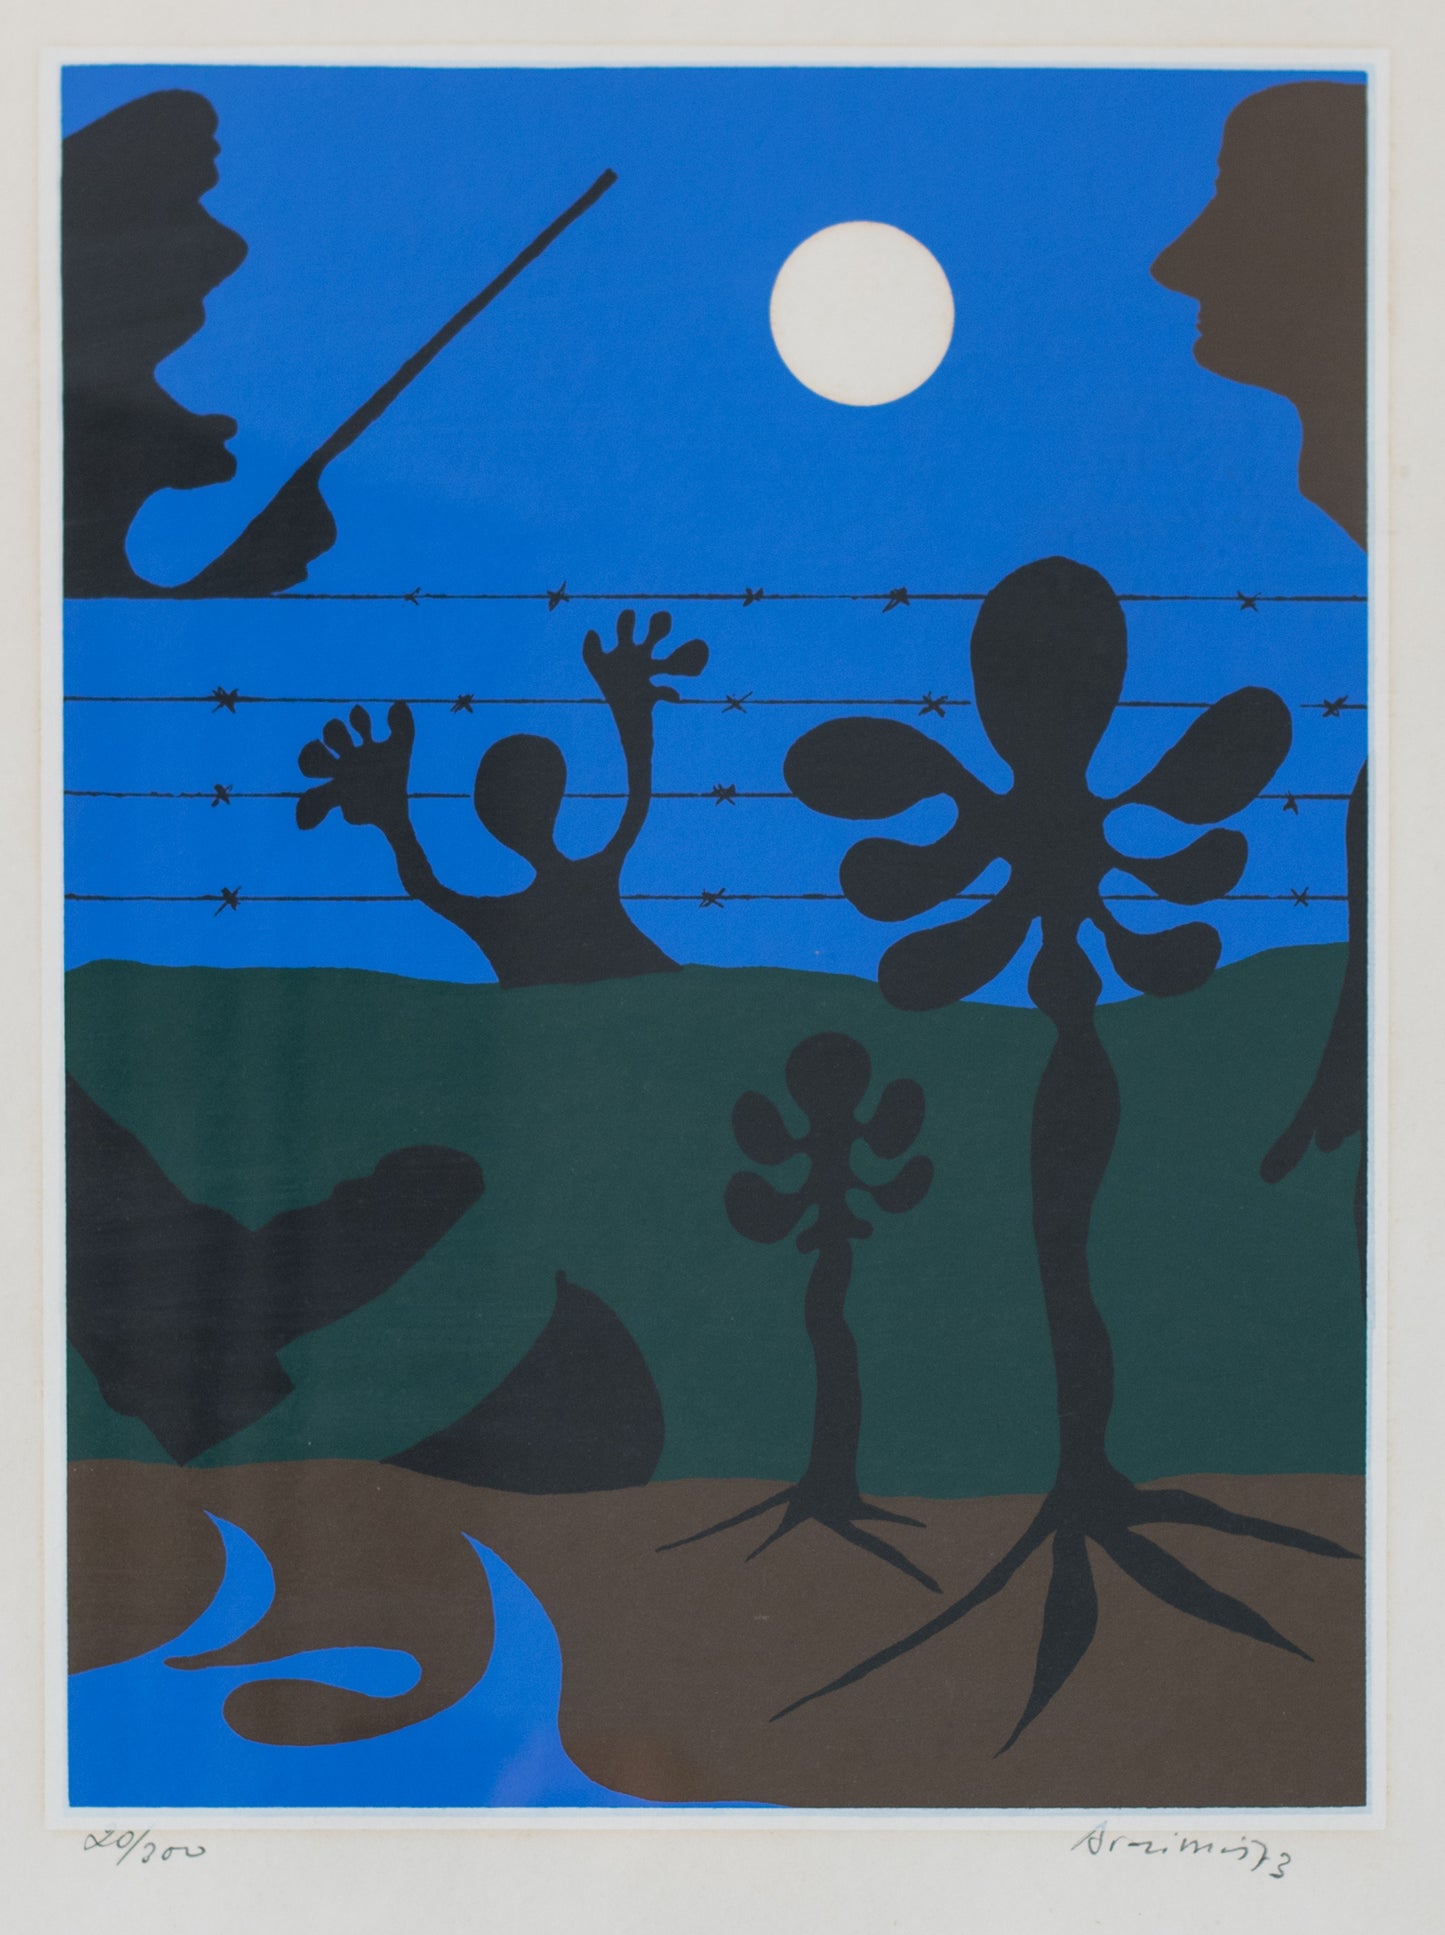 Moonlit scene with figure and guard in the manner of Joan Miró